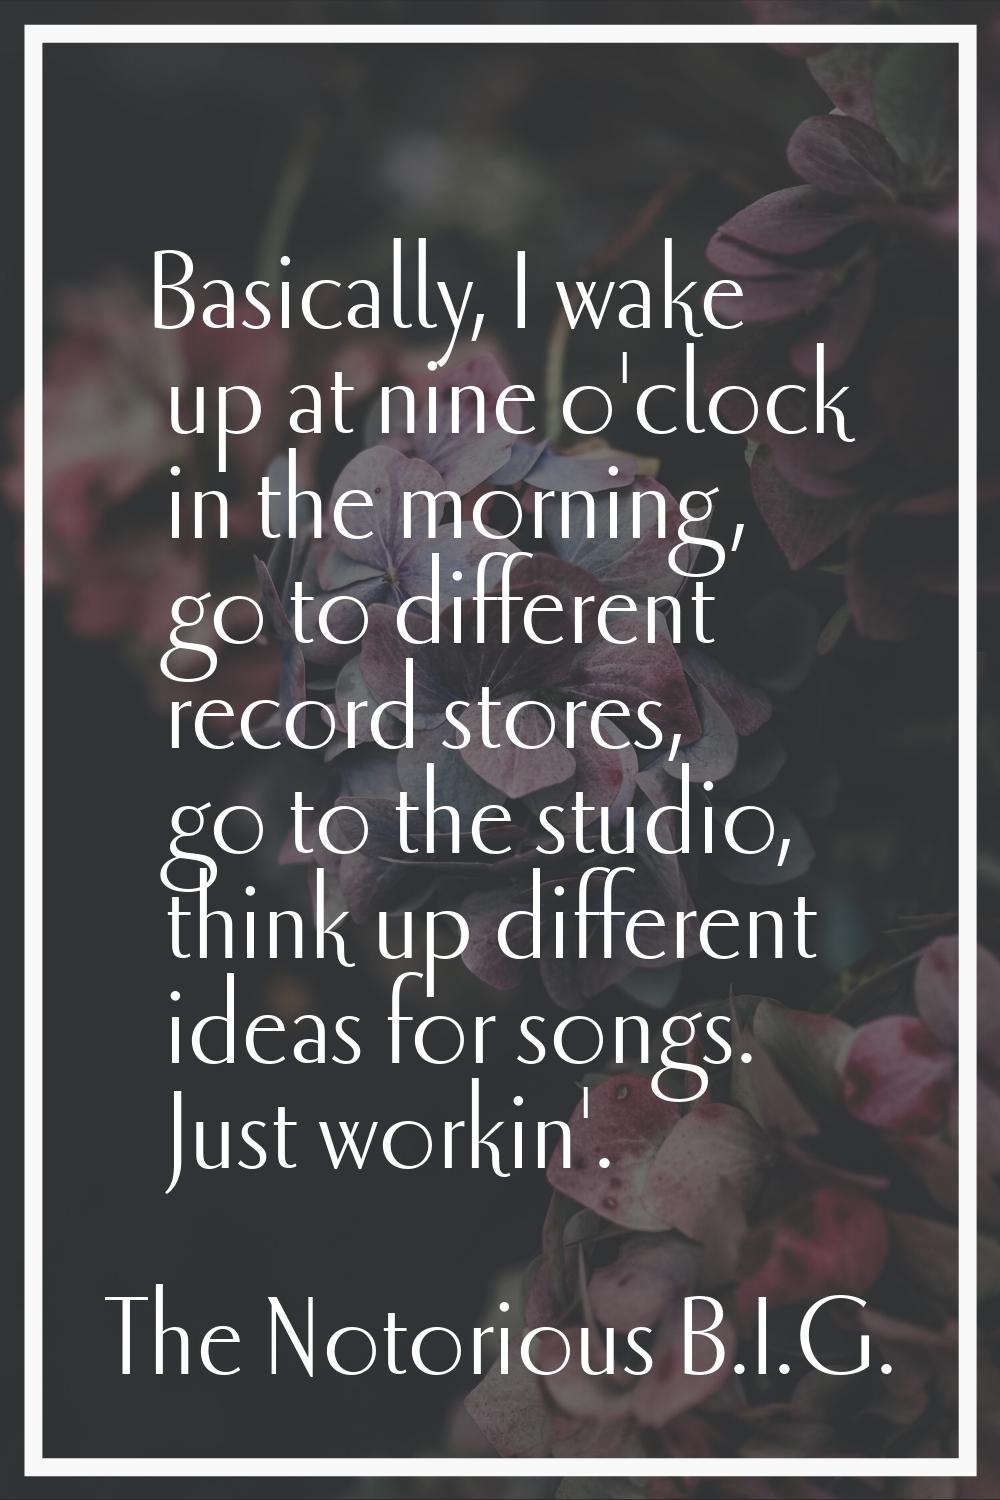 Basically, I wake up at nine o'clock in the morning, go to different record stores, go to the studi